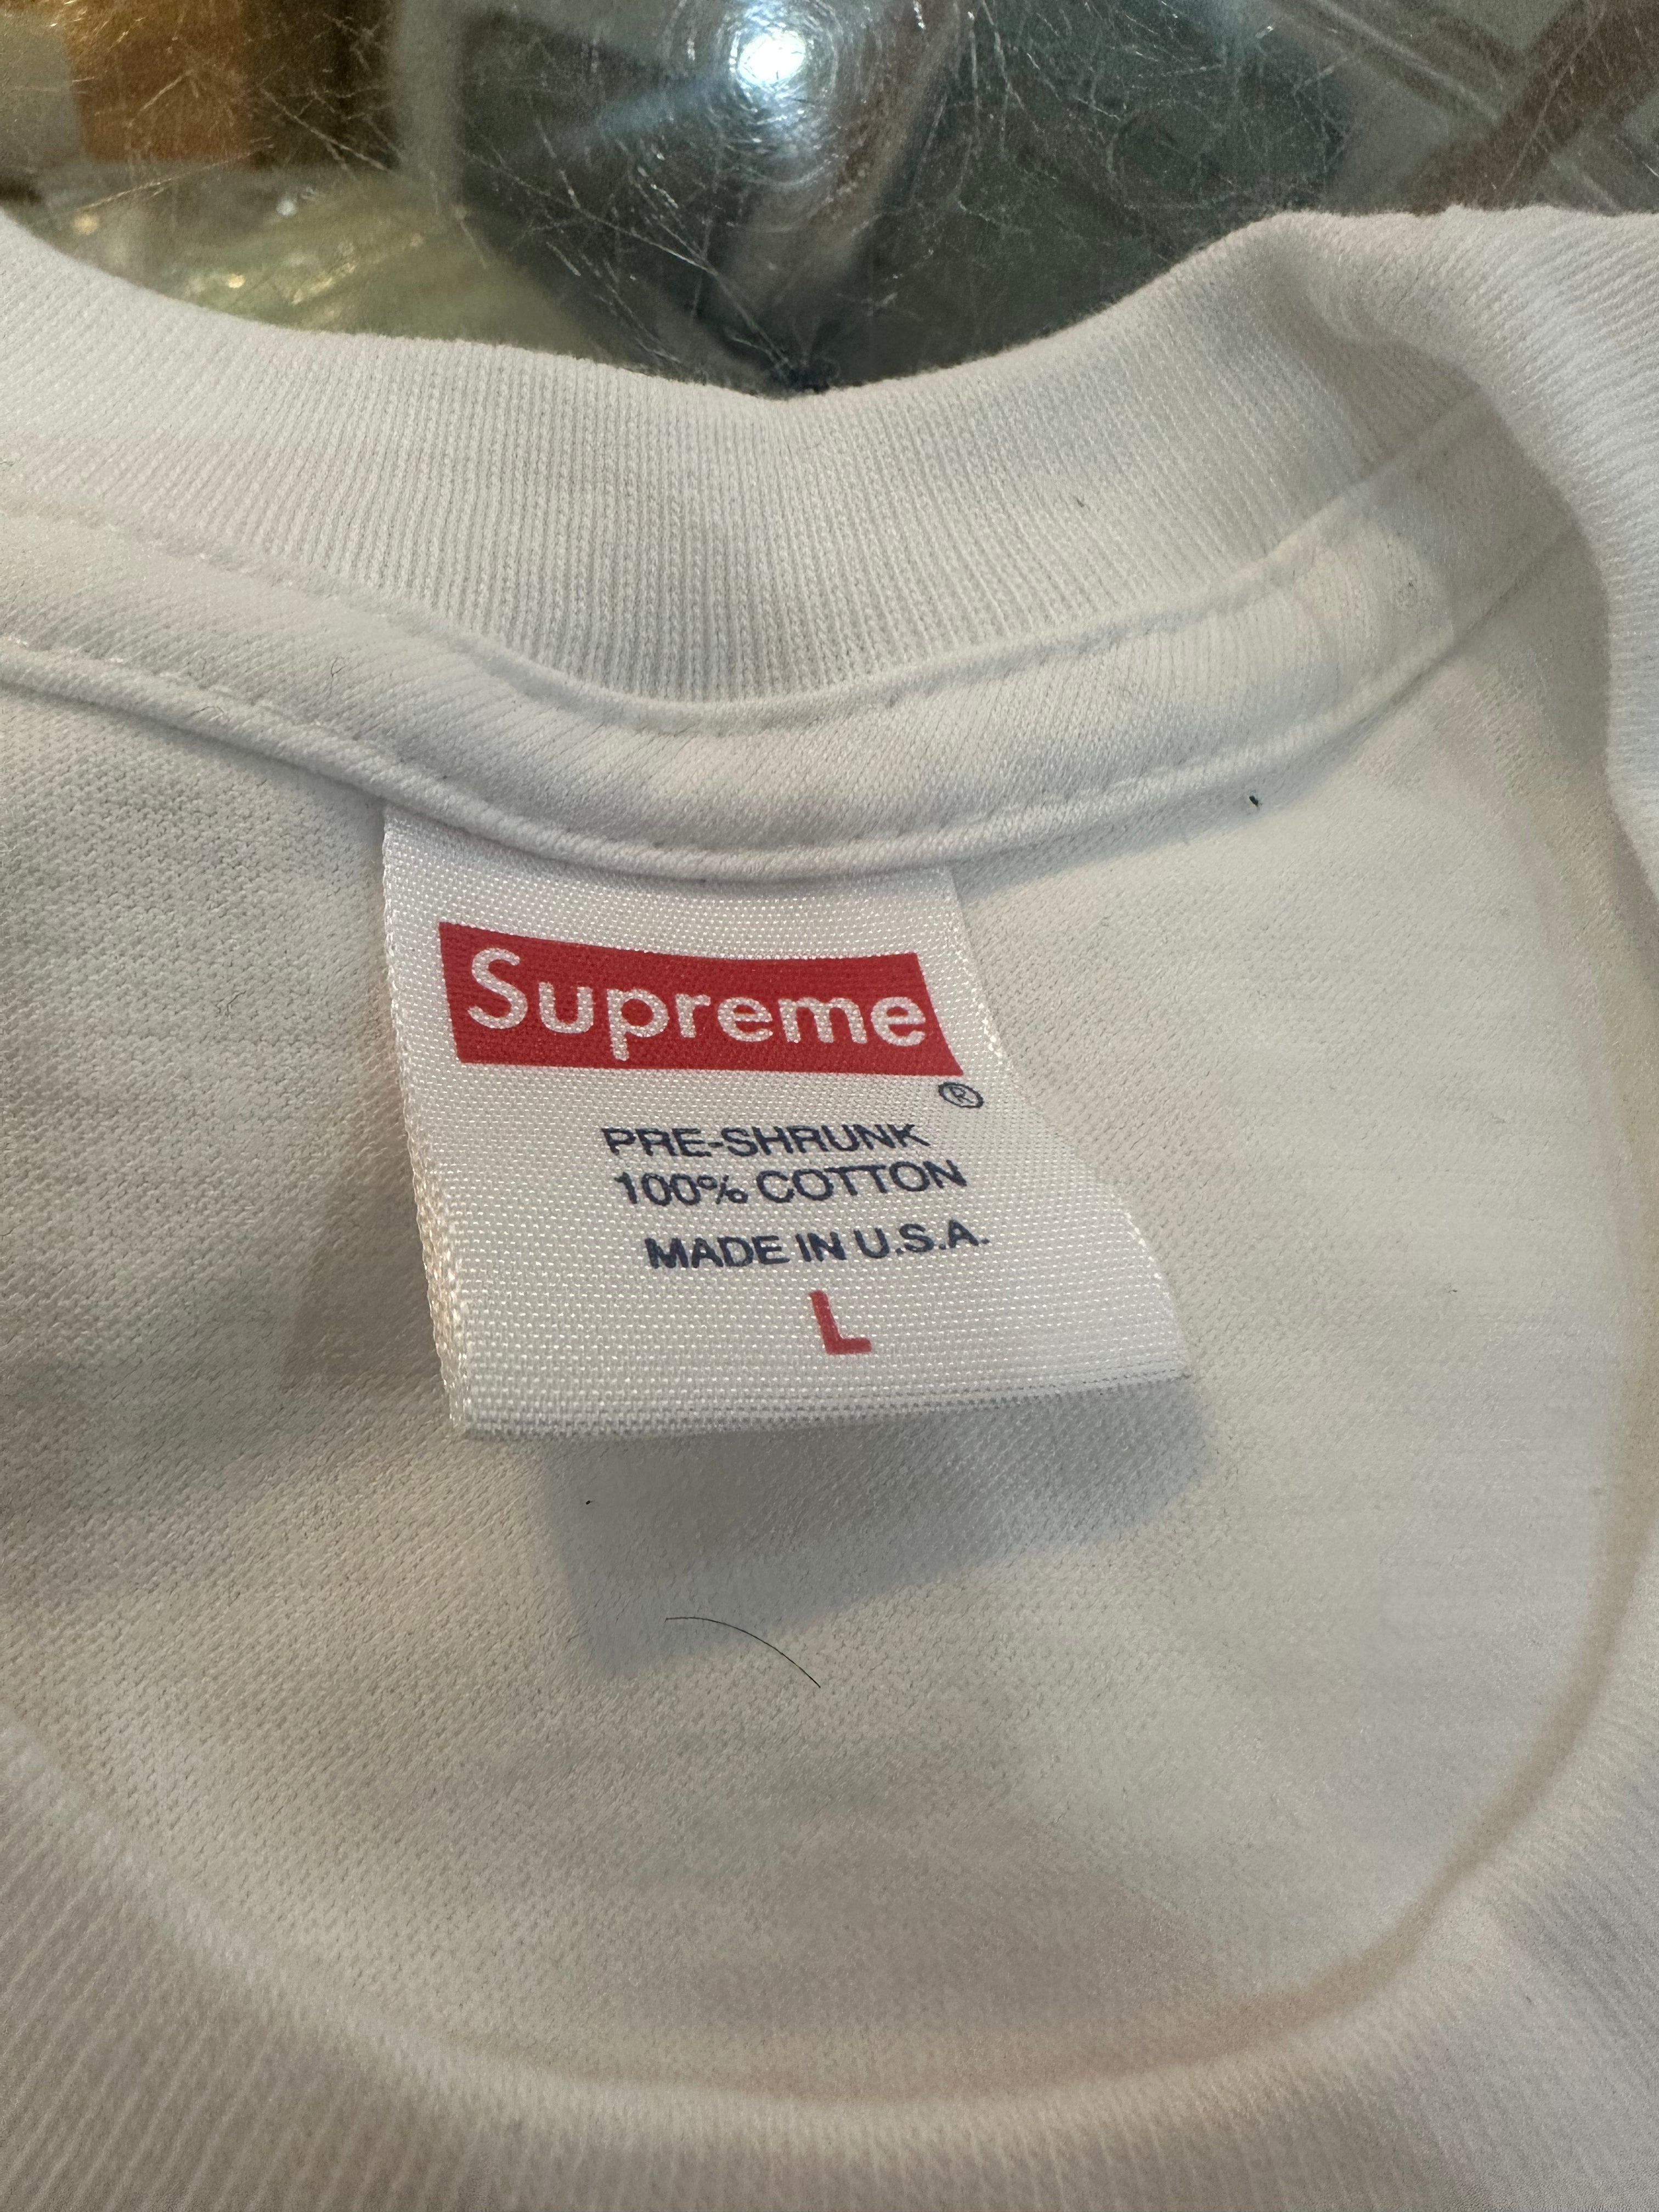 Brand new White Supreme Guts Tee Size Large